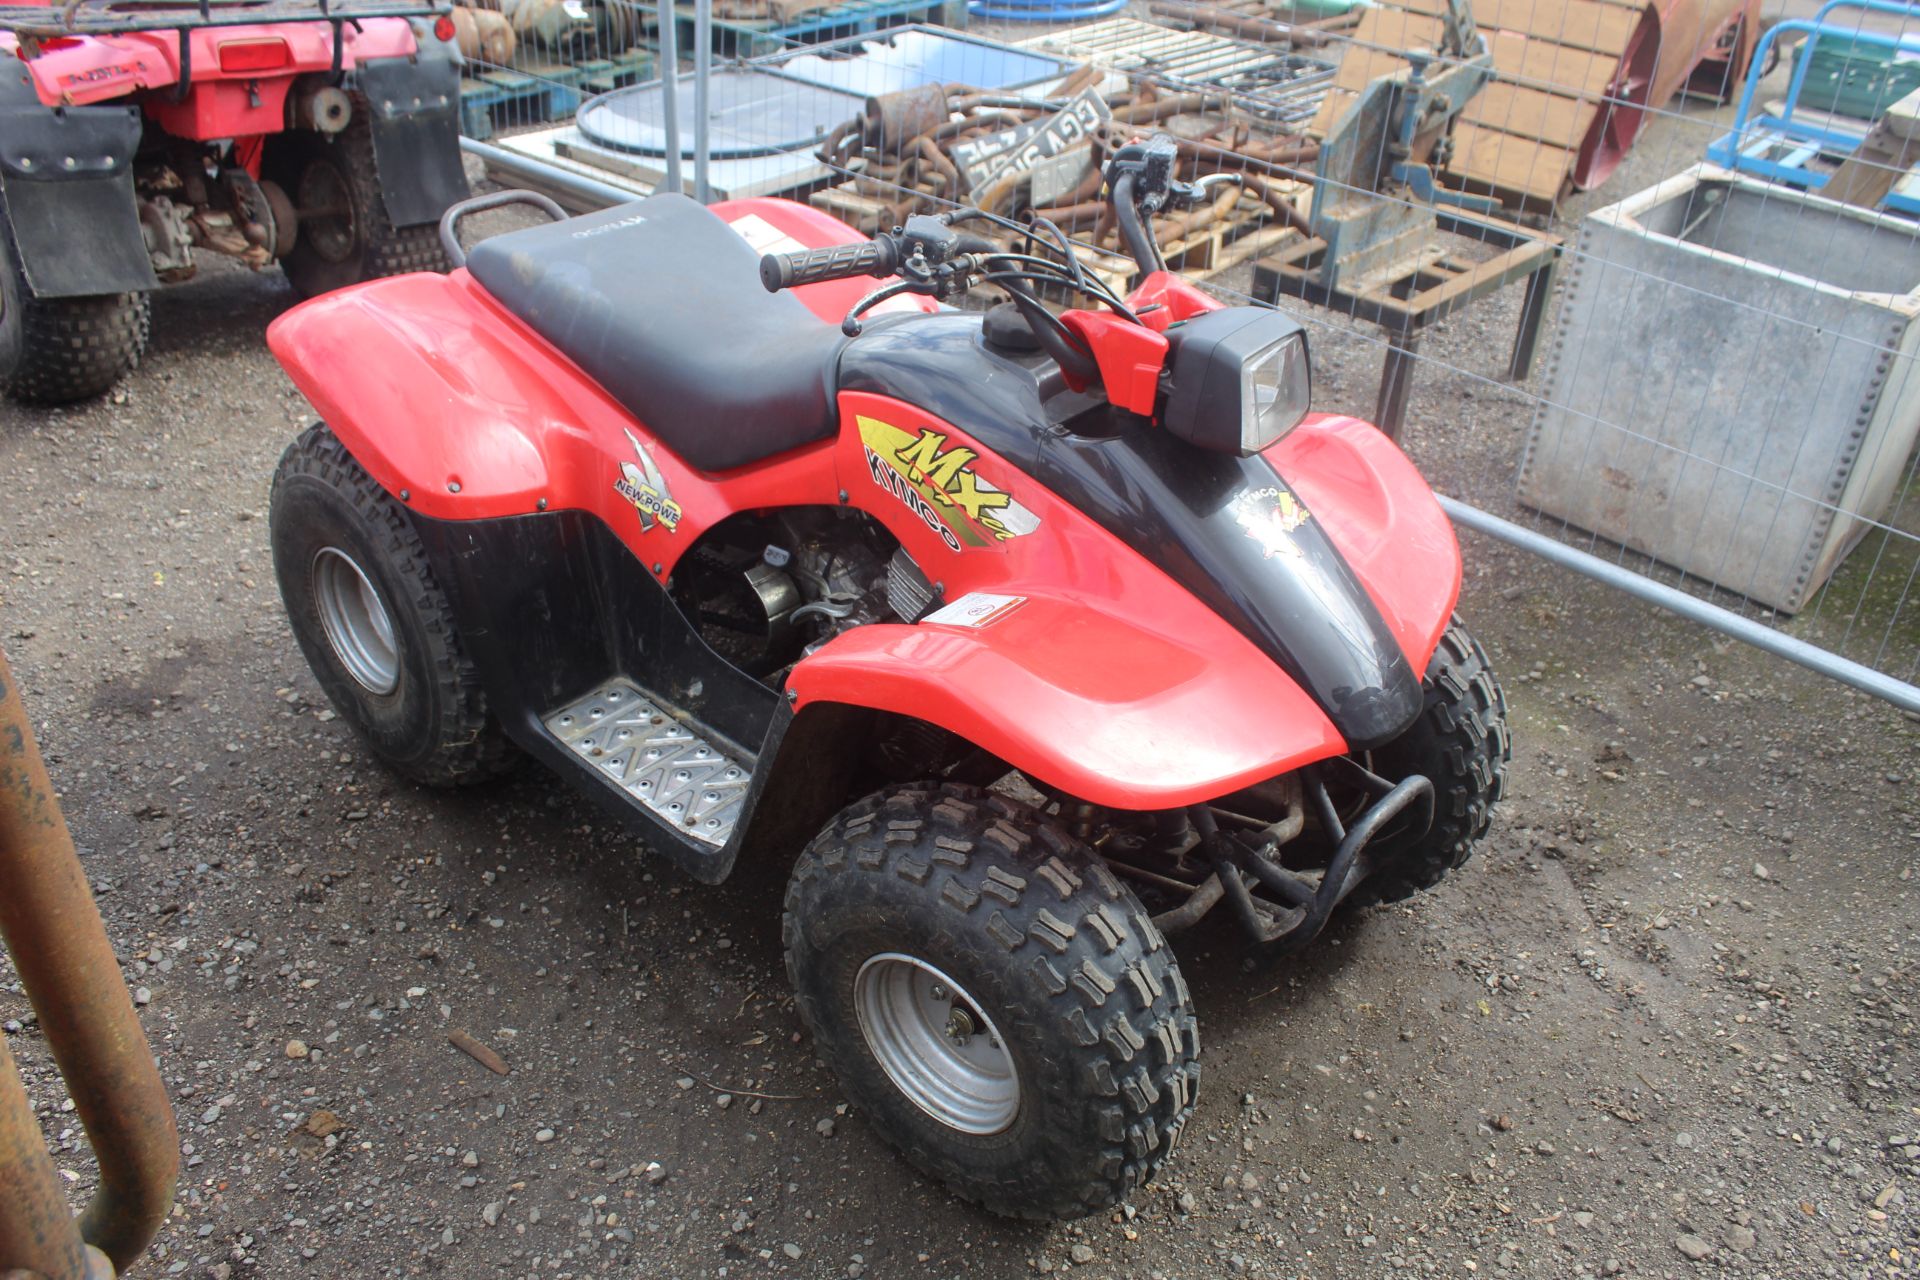 Kymco MX'er 150cc off road ATV. 2004. owned from new. Key, Manual held.